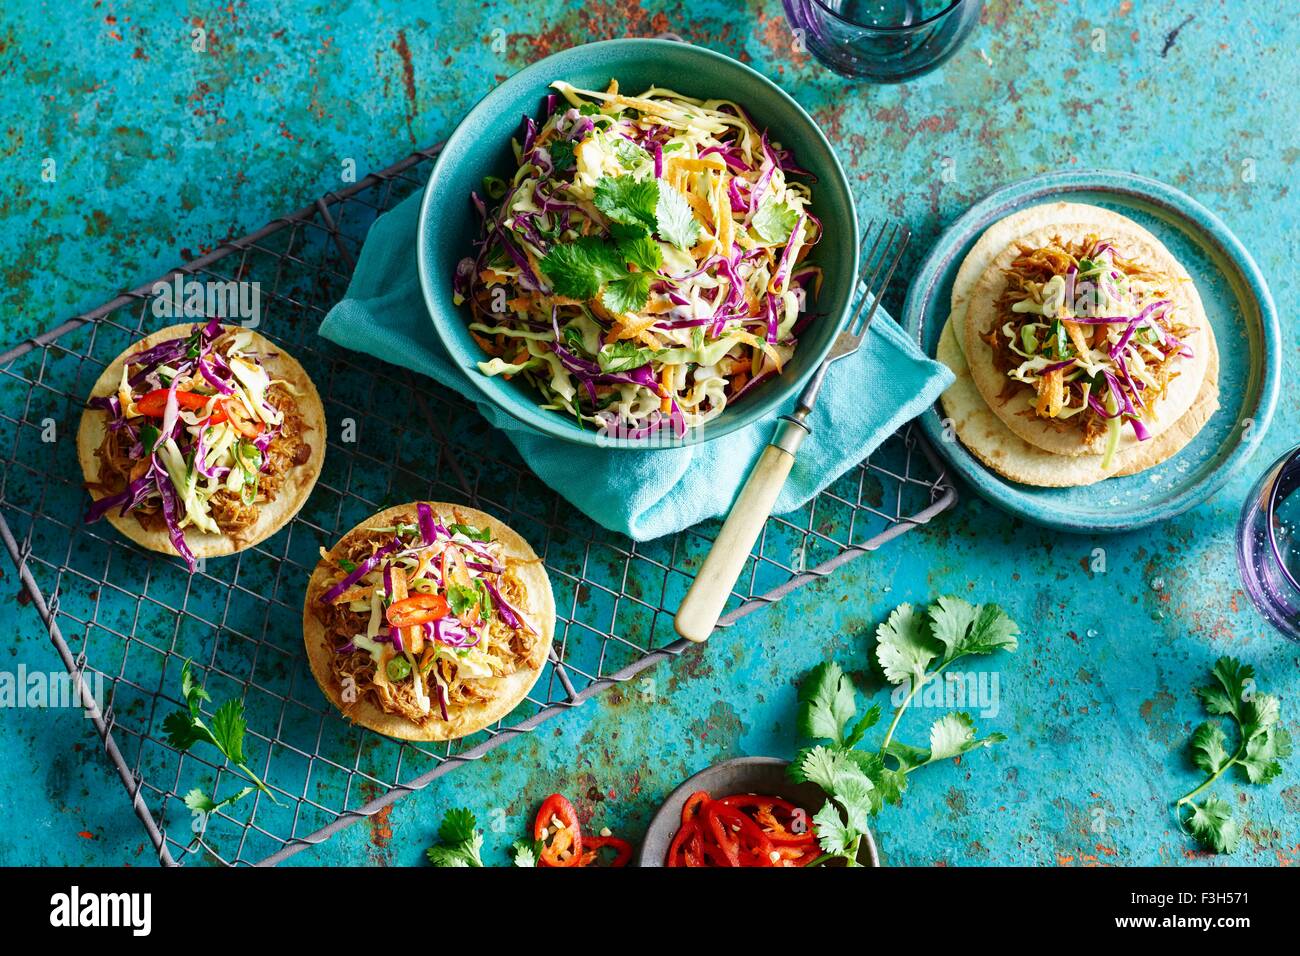 Pulled Chicken Tostada with Slaw Stock Photo